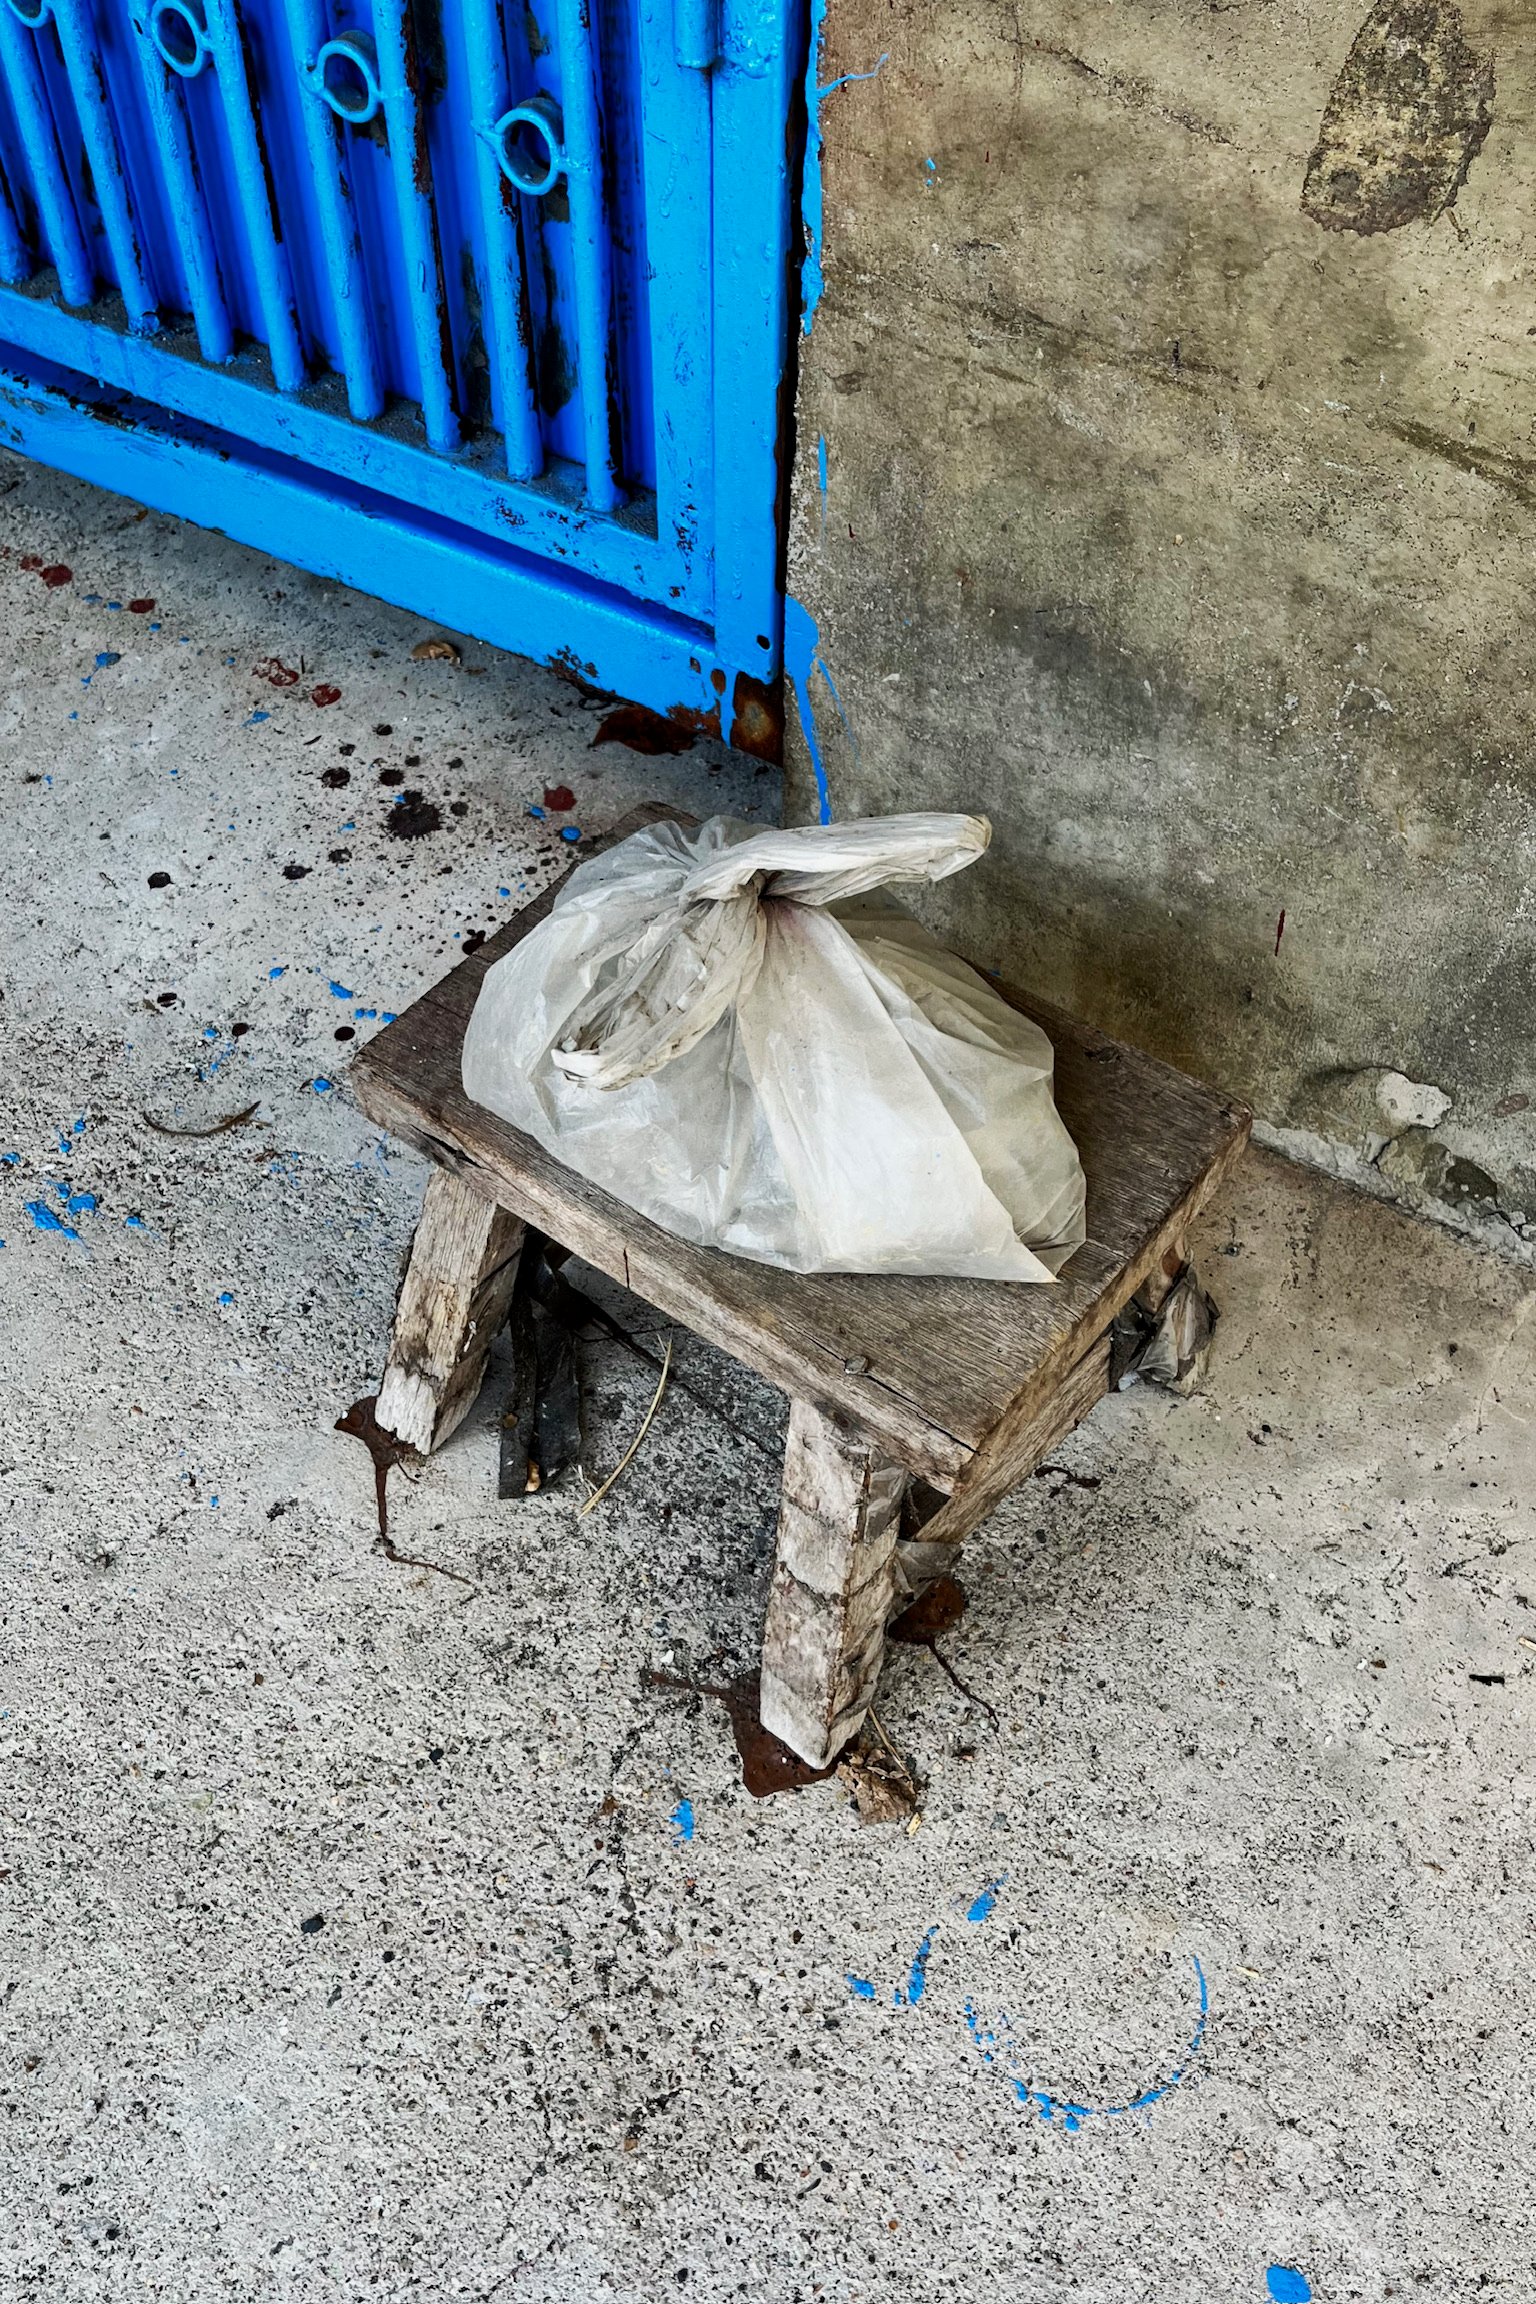 a plastic bag on a small stool by a steel bright blue door.